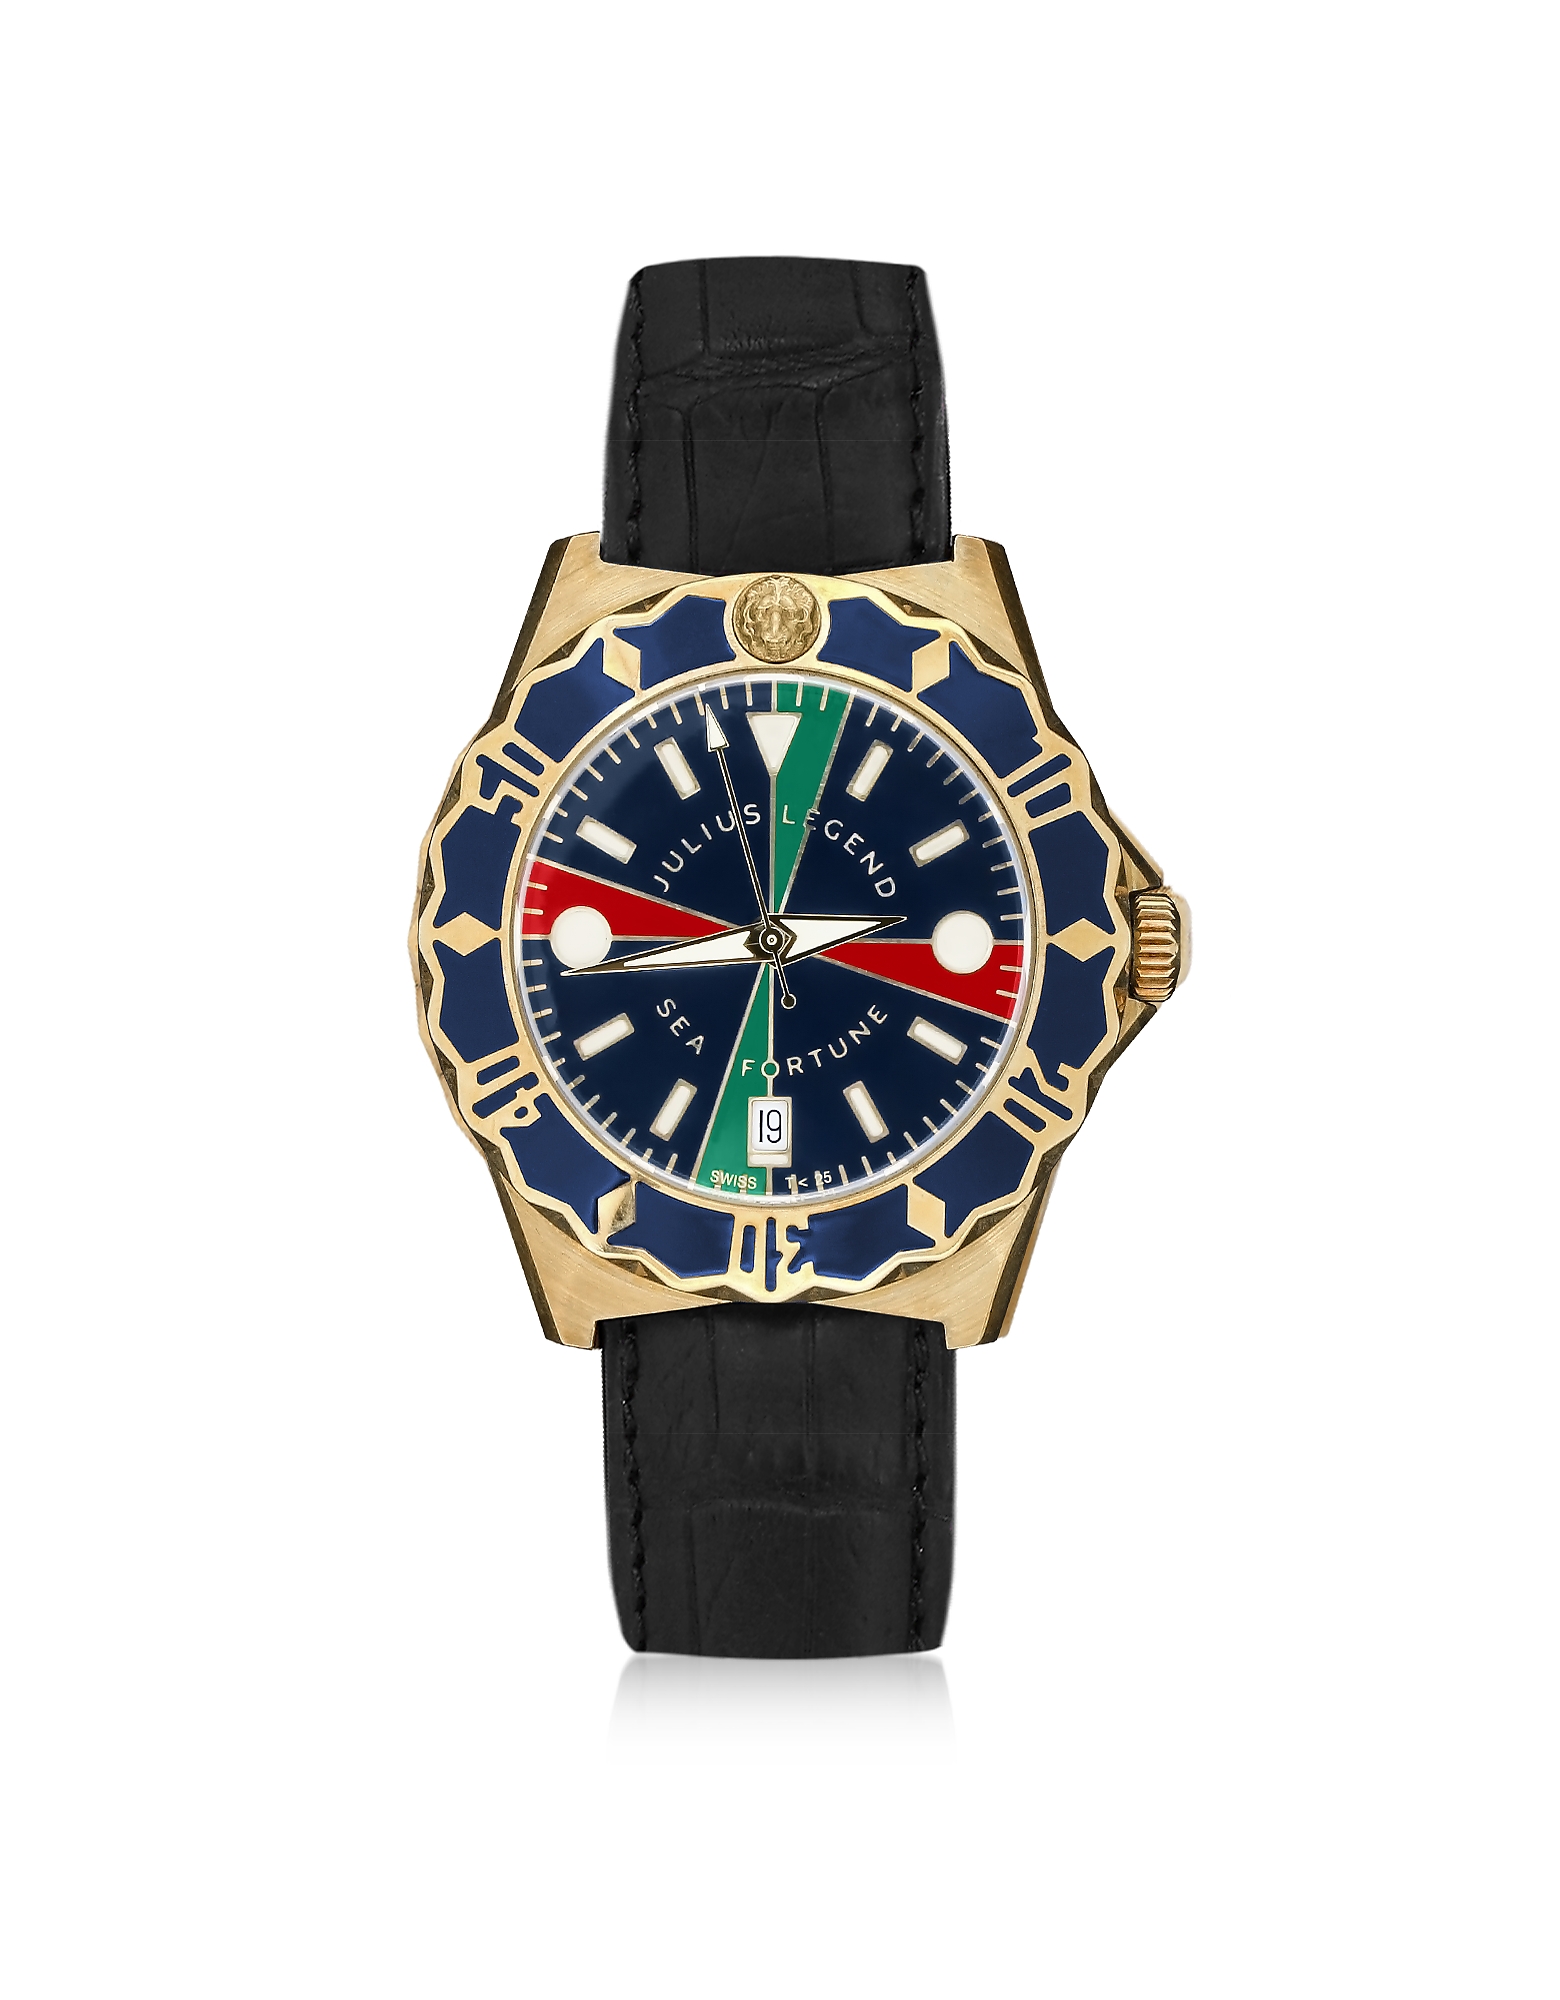 

Sea Fortune Diver - 18K Gold and Leather Watch